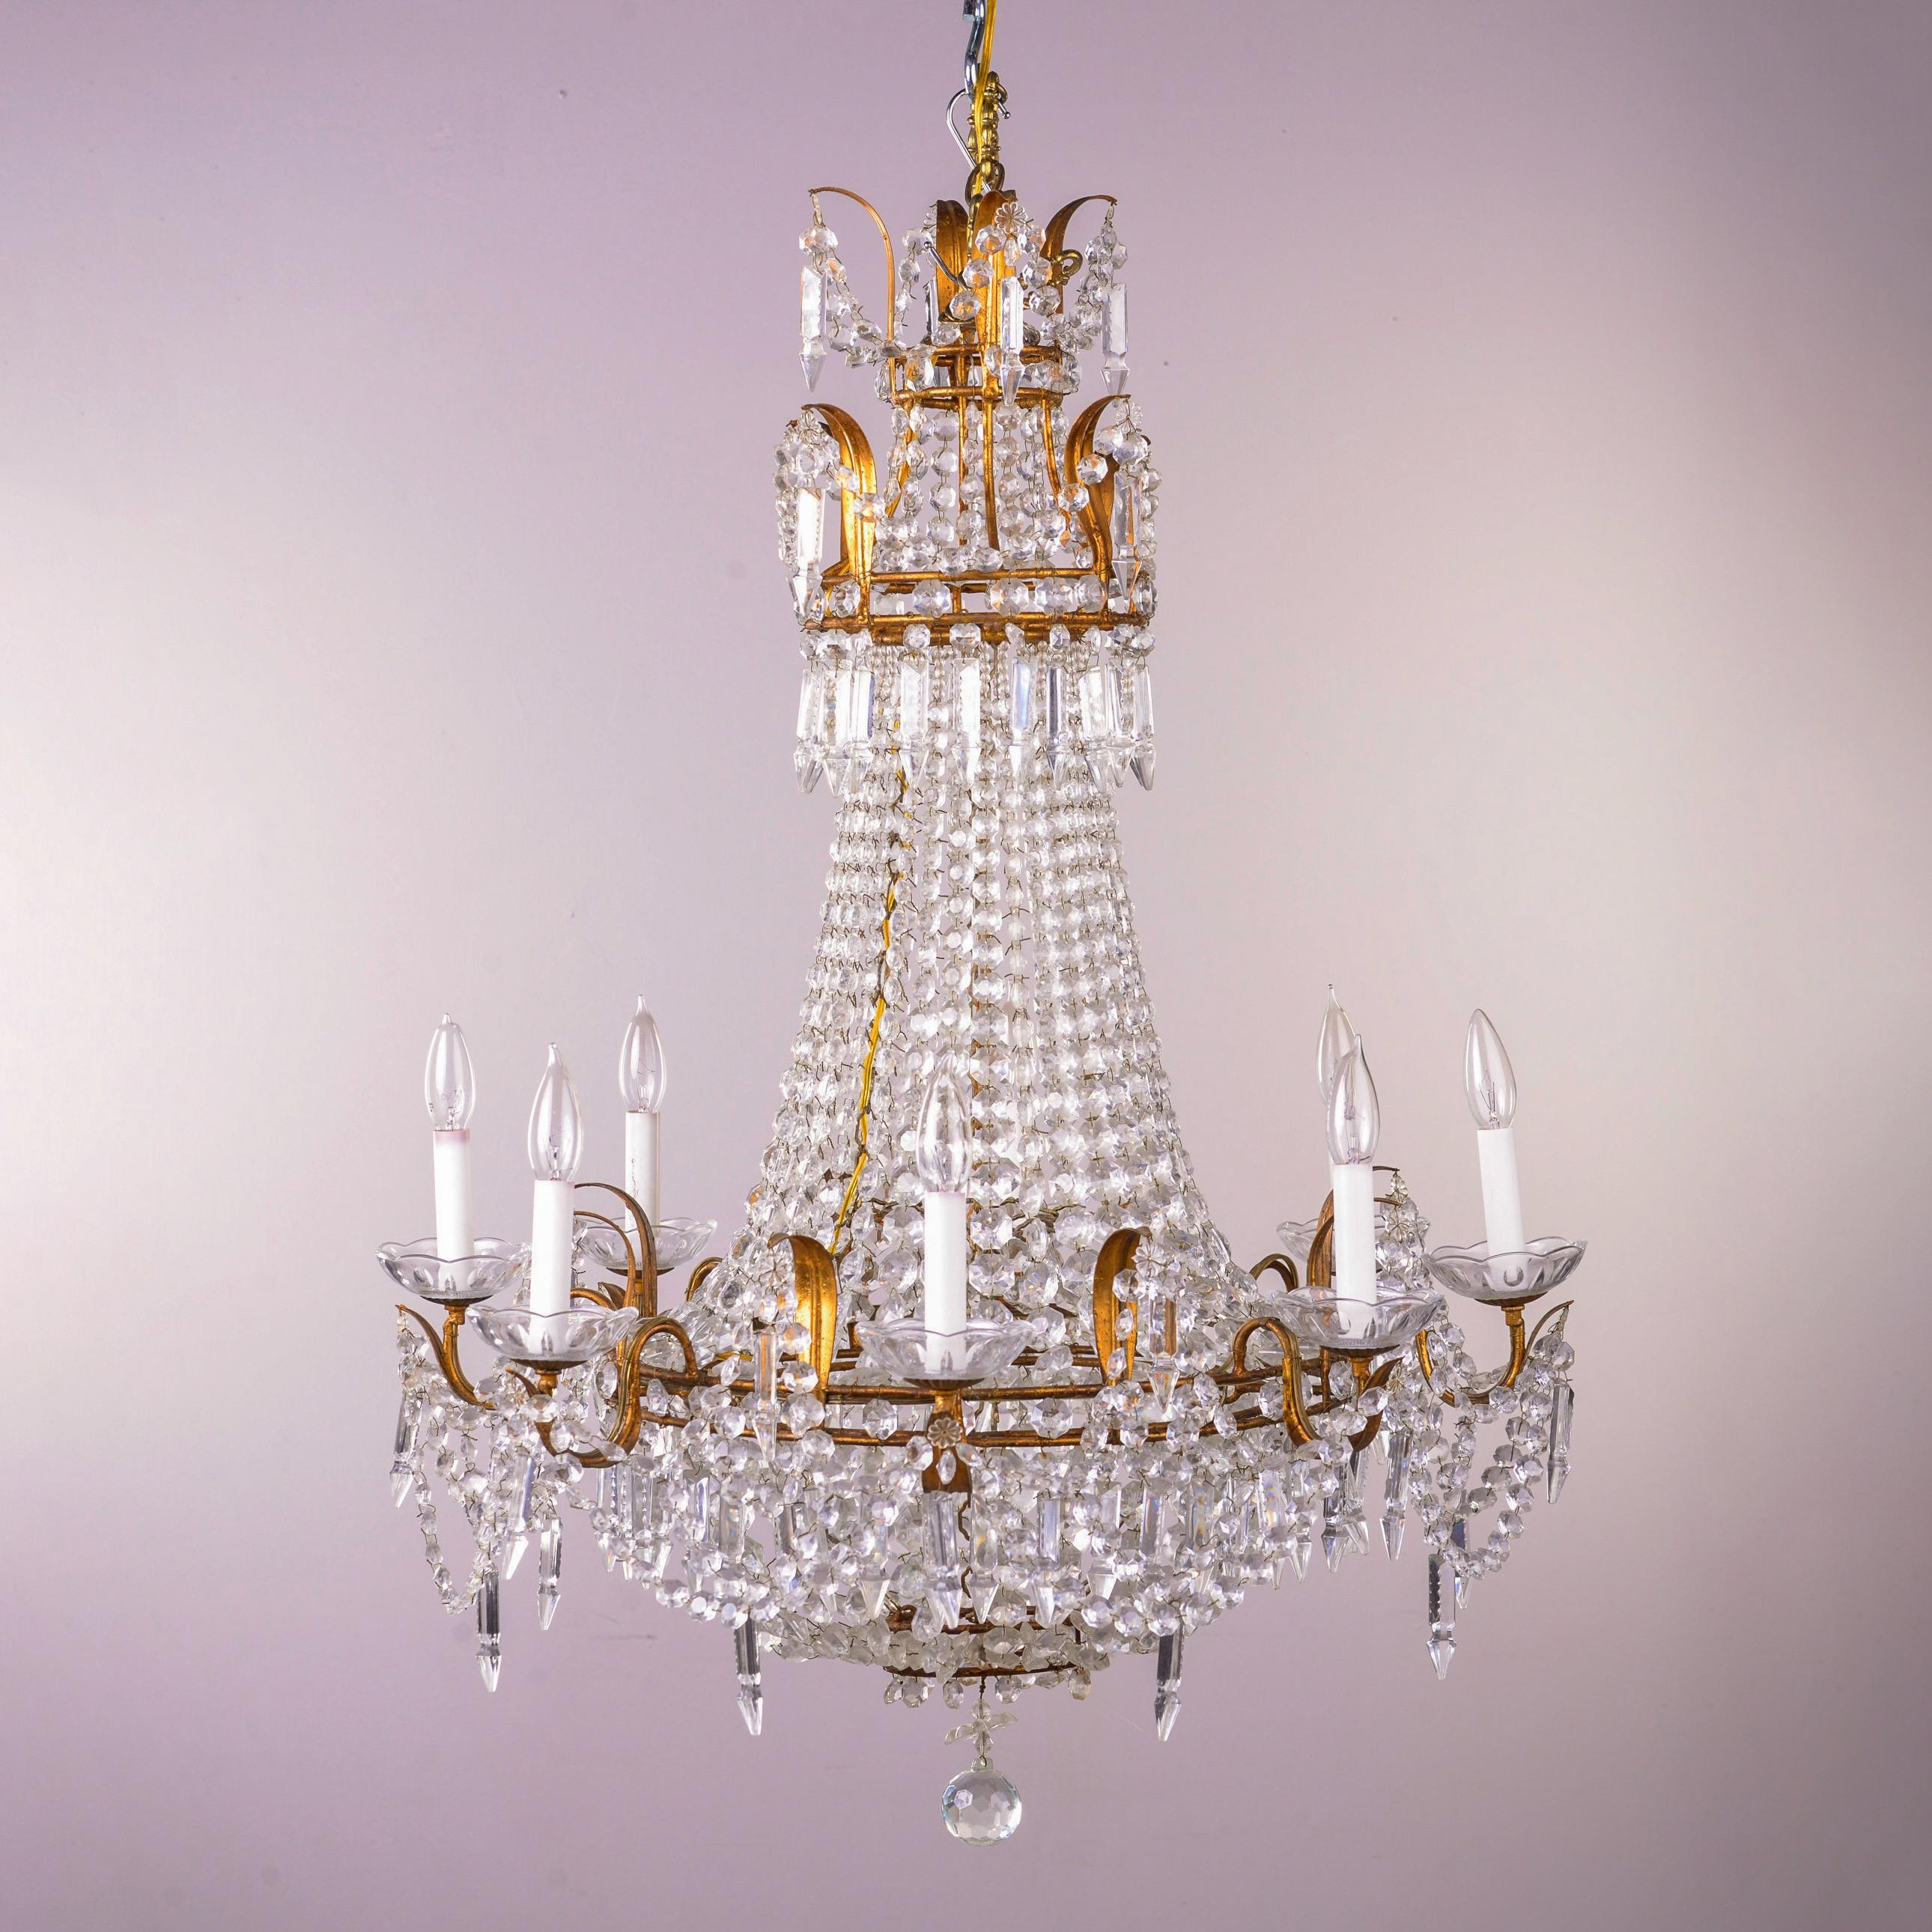 Found in France, this circa 1920s empire style chandelier features a basket form lower tier ringed with eight candle style lights with candelabra sized sockets. The top tiers and base have gilt metal leaf form accents and are draped in strings of